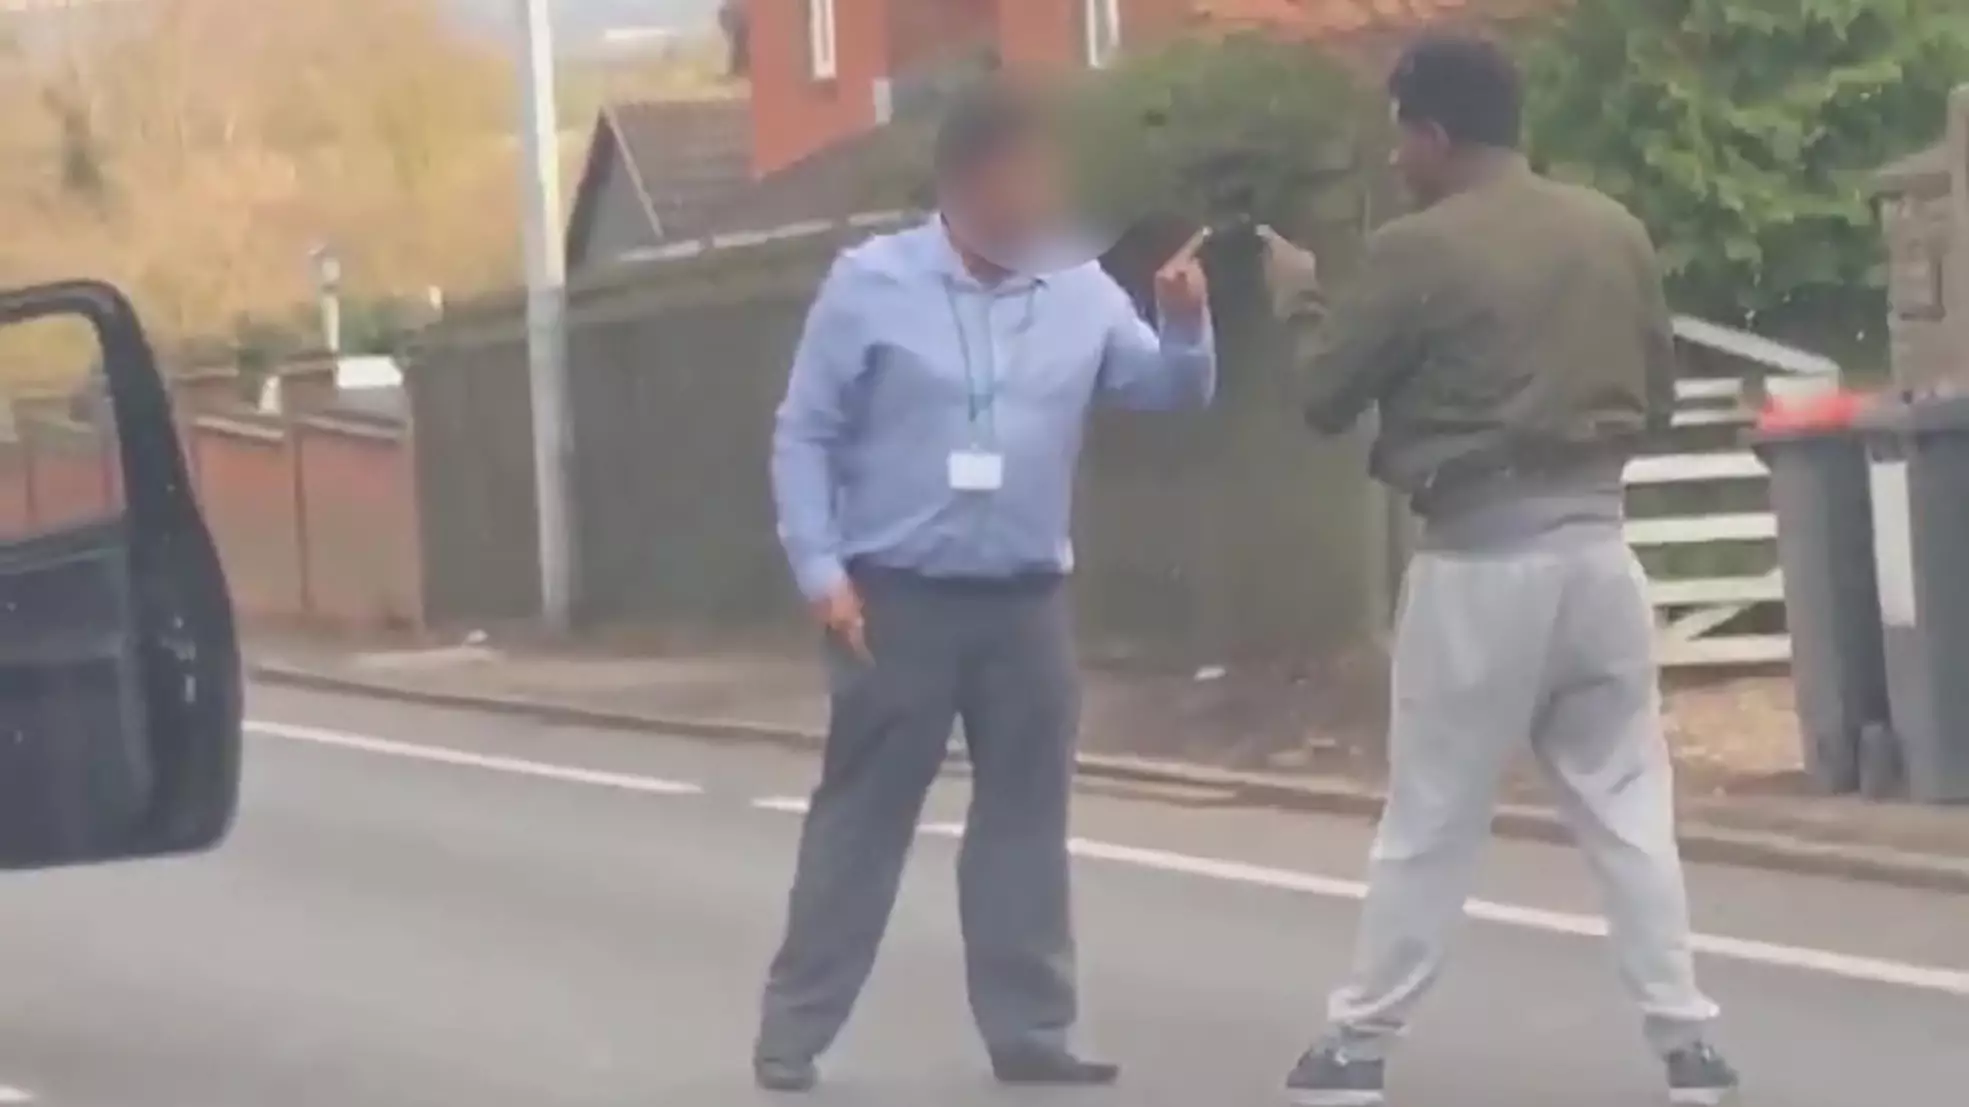 Video Shows 'Comical' Fight Between Drivers Before Getaway Leads To Another Crash